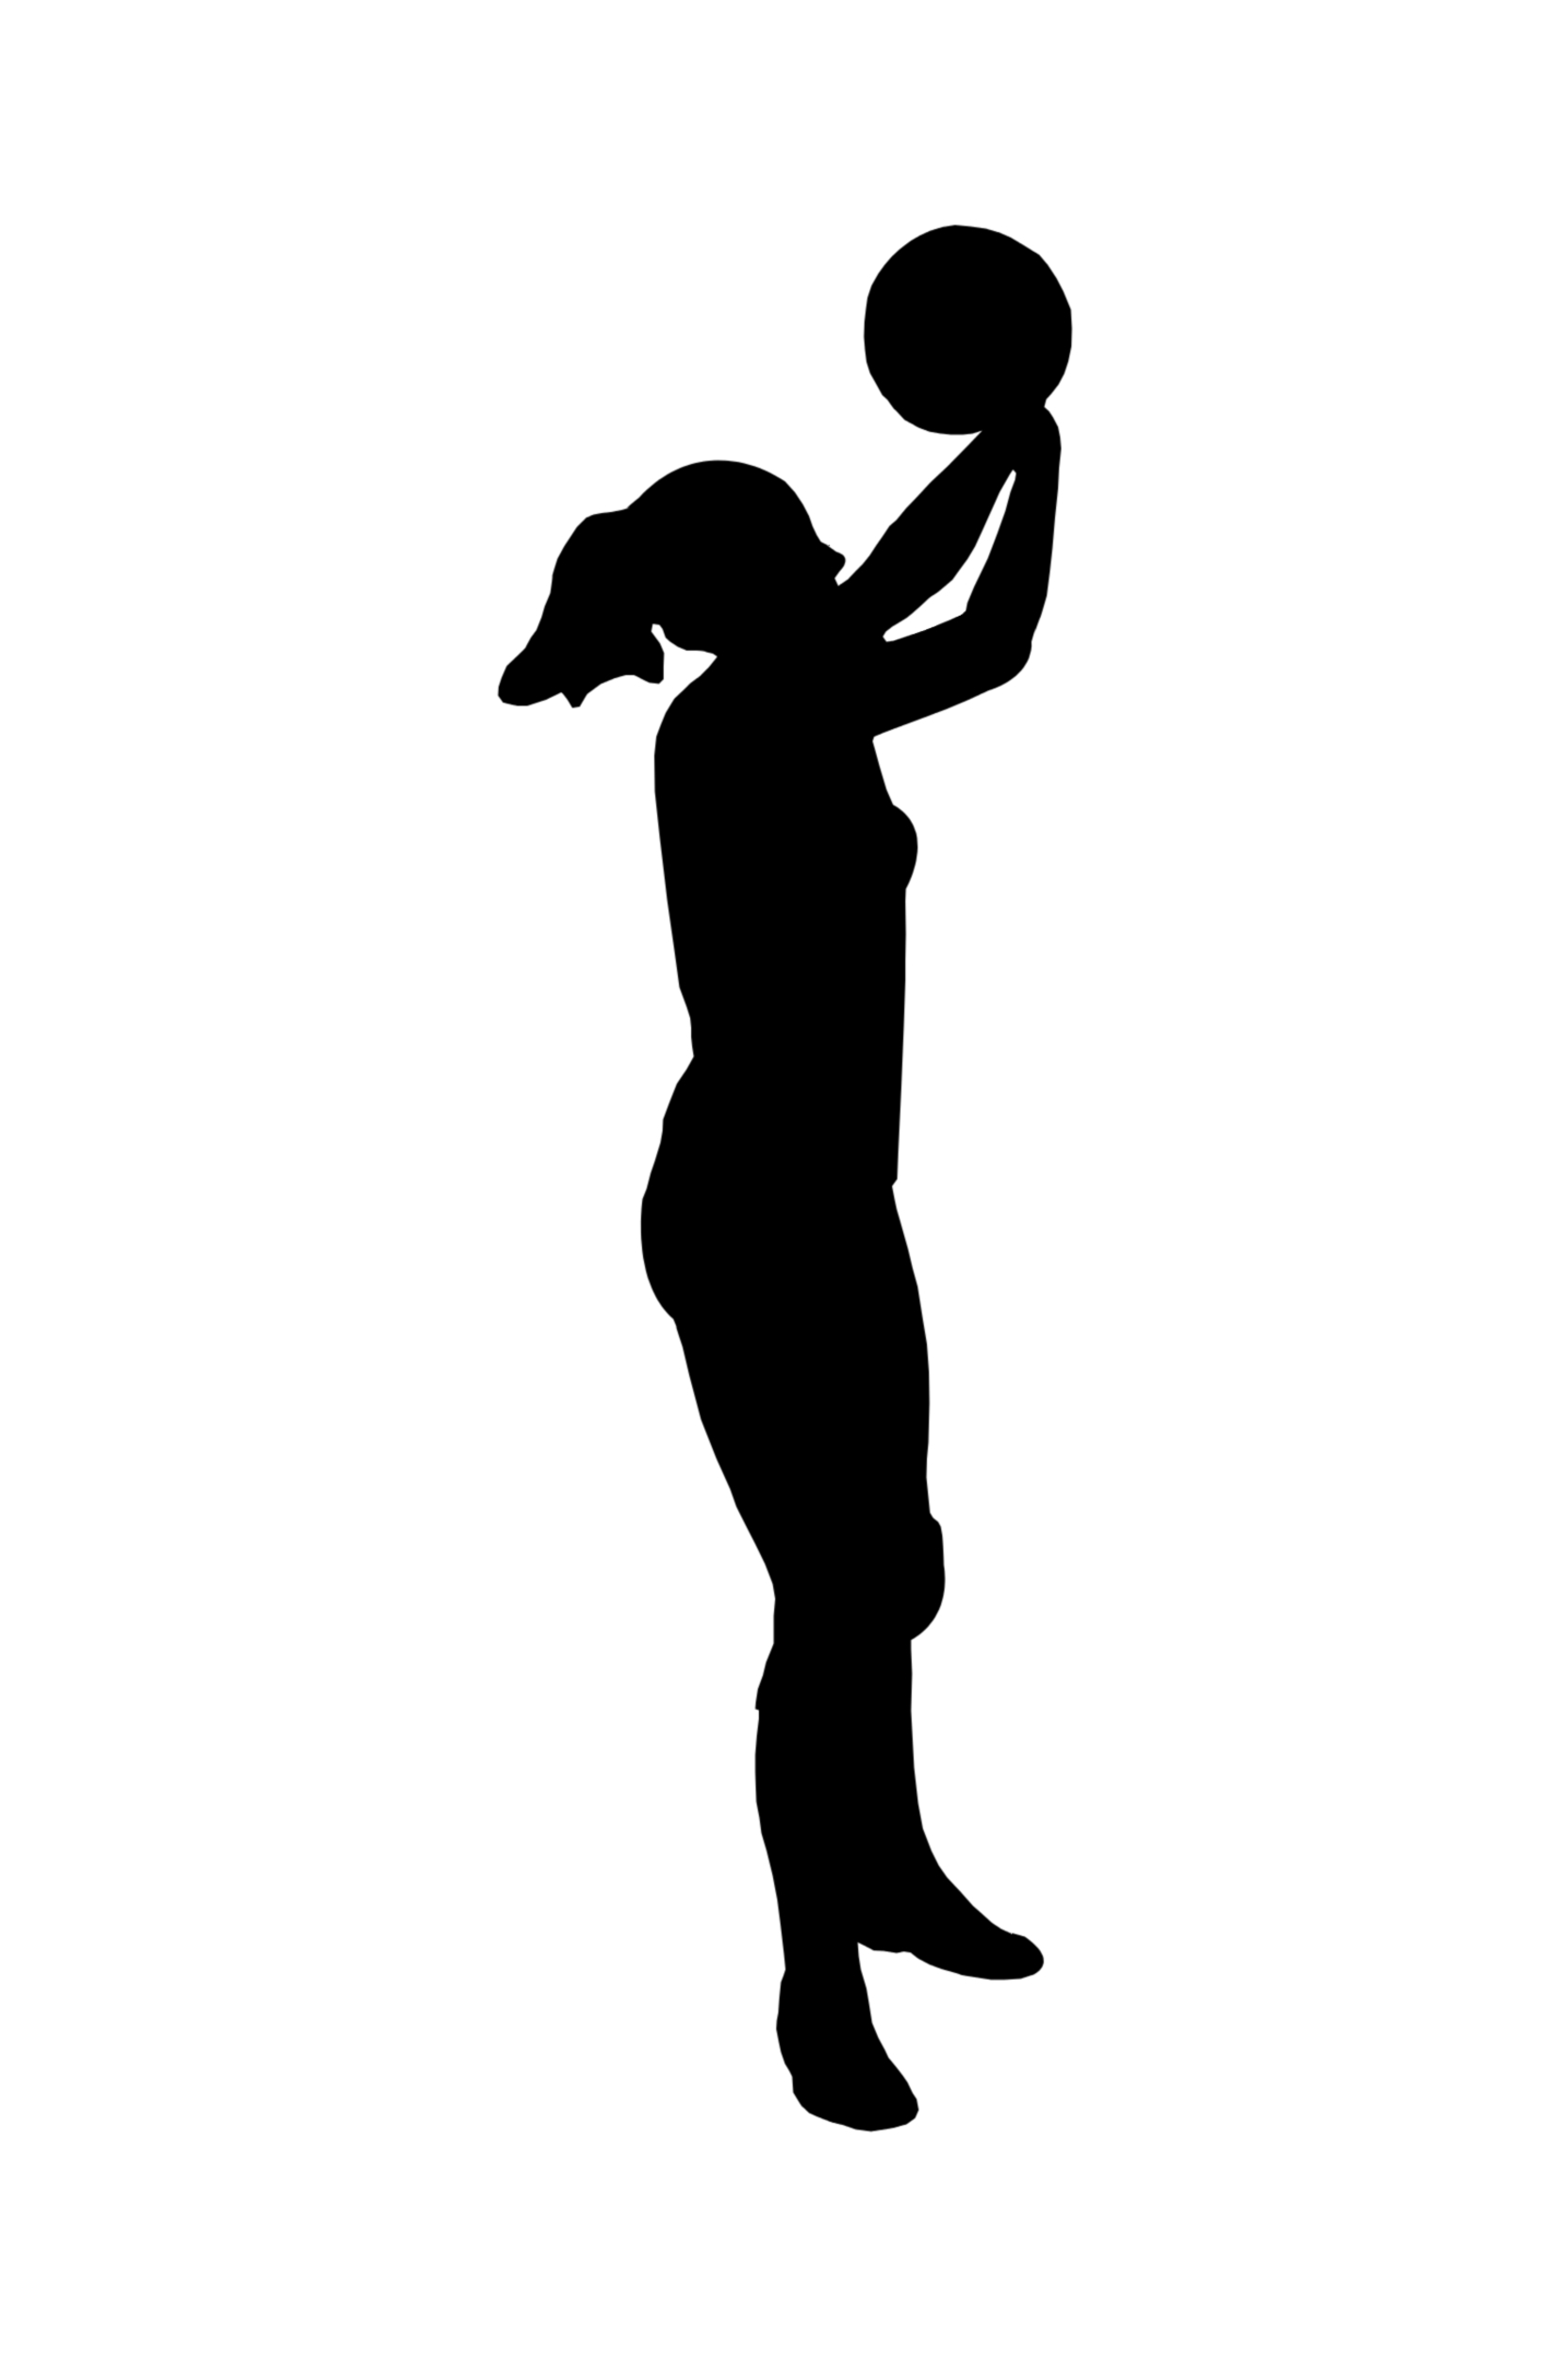 Basketball player images clip art